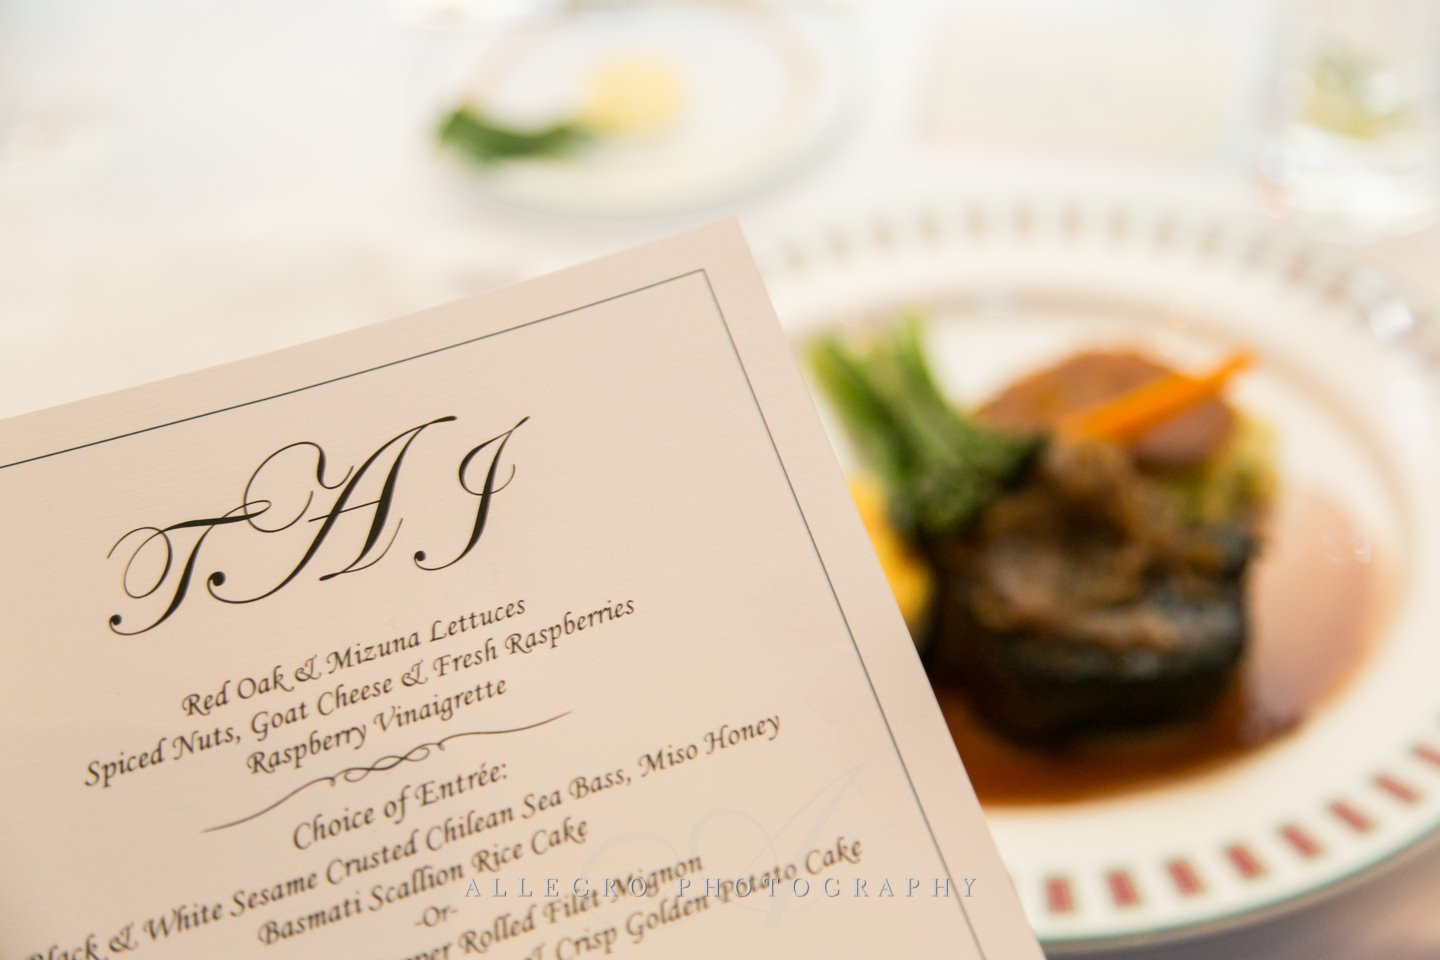 Menu with steak option- photo by allegro photography